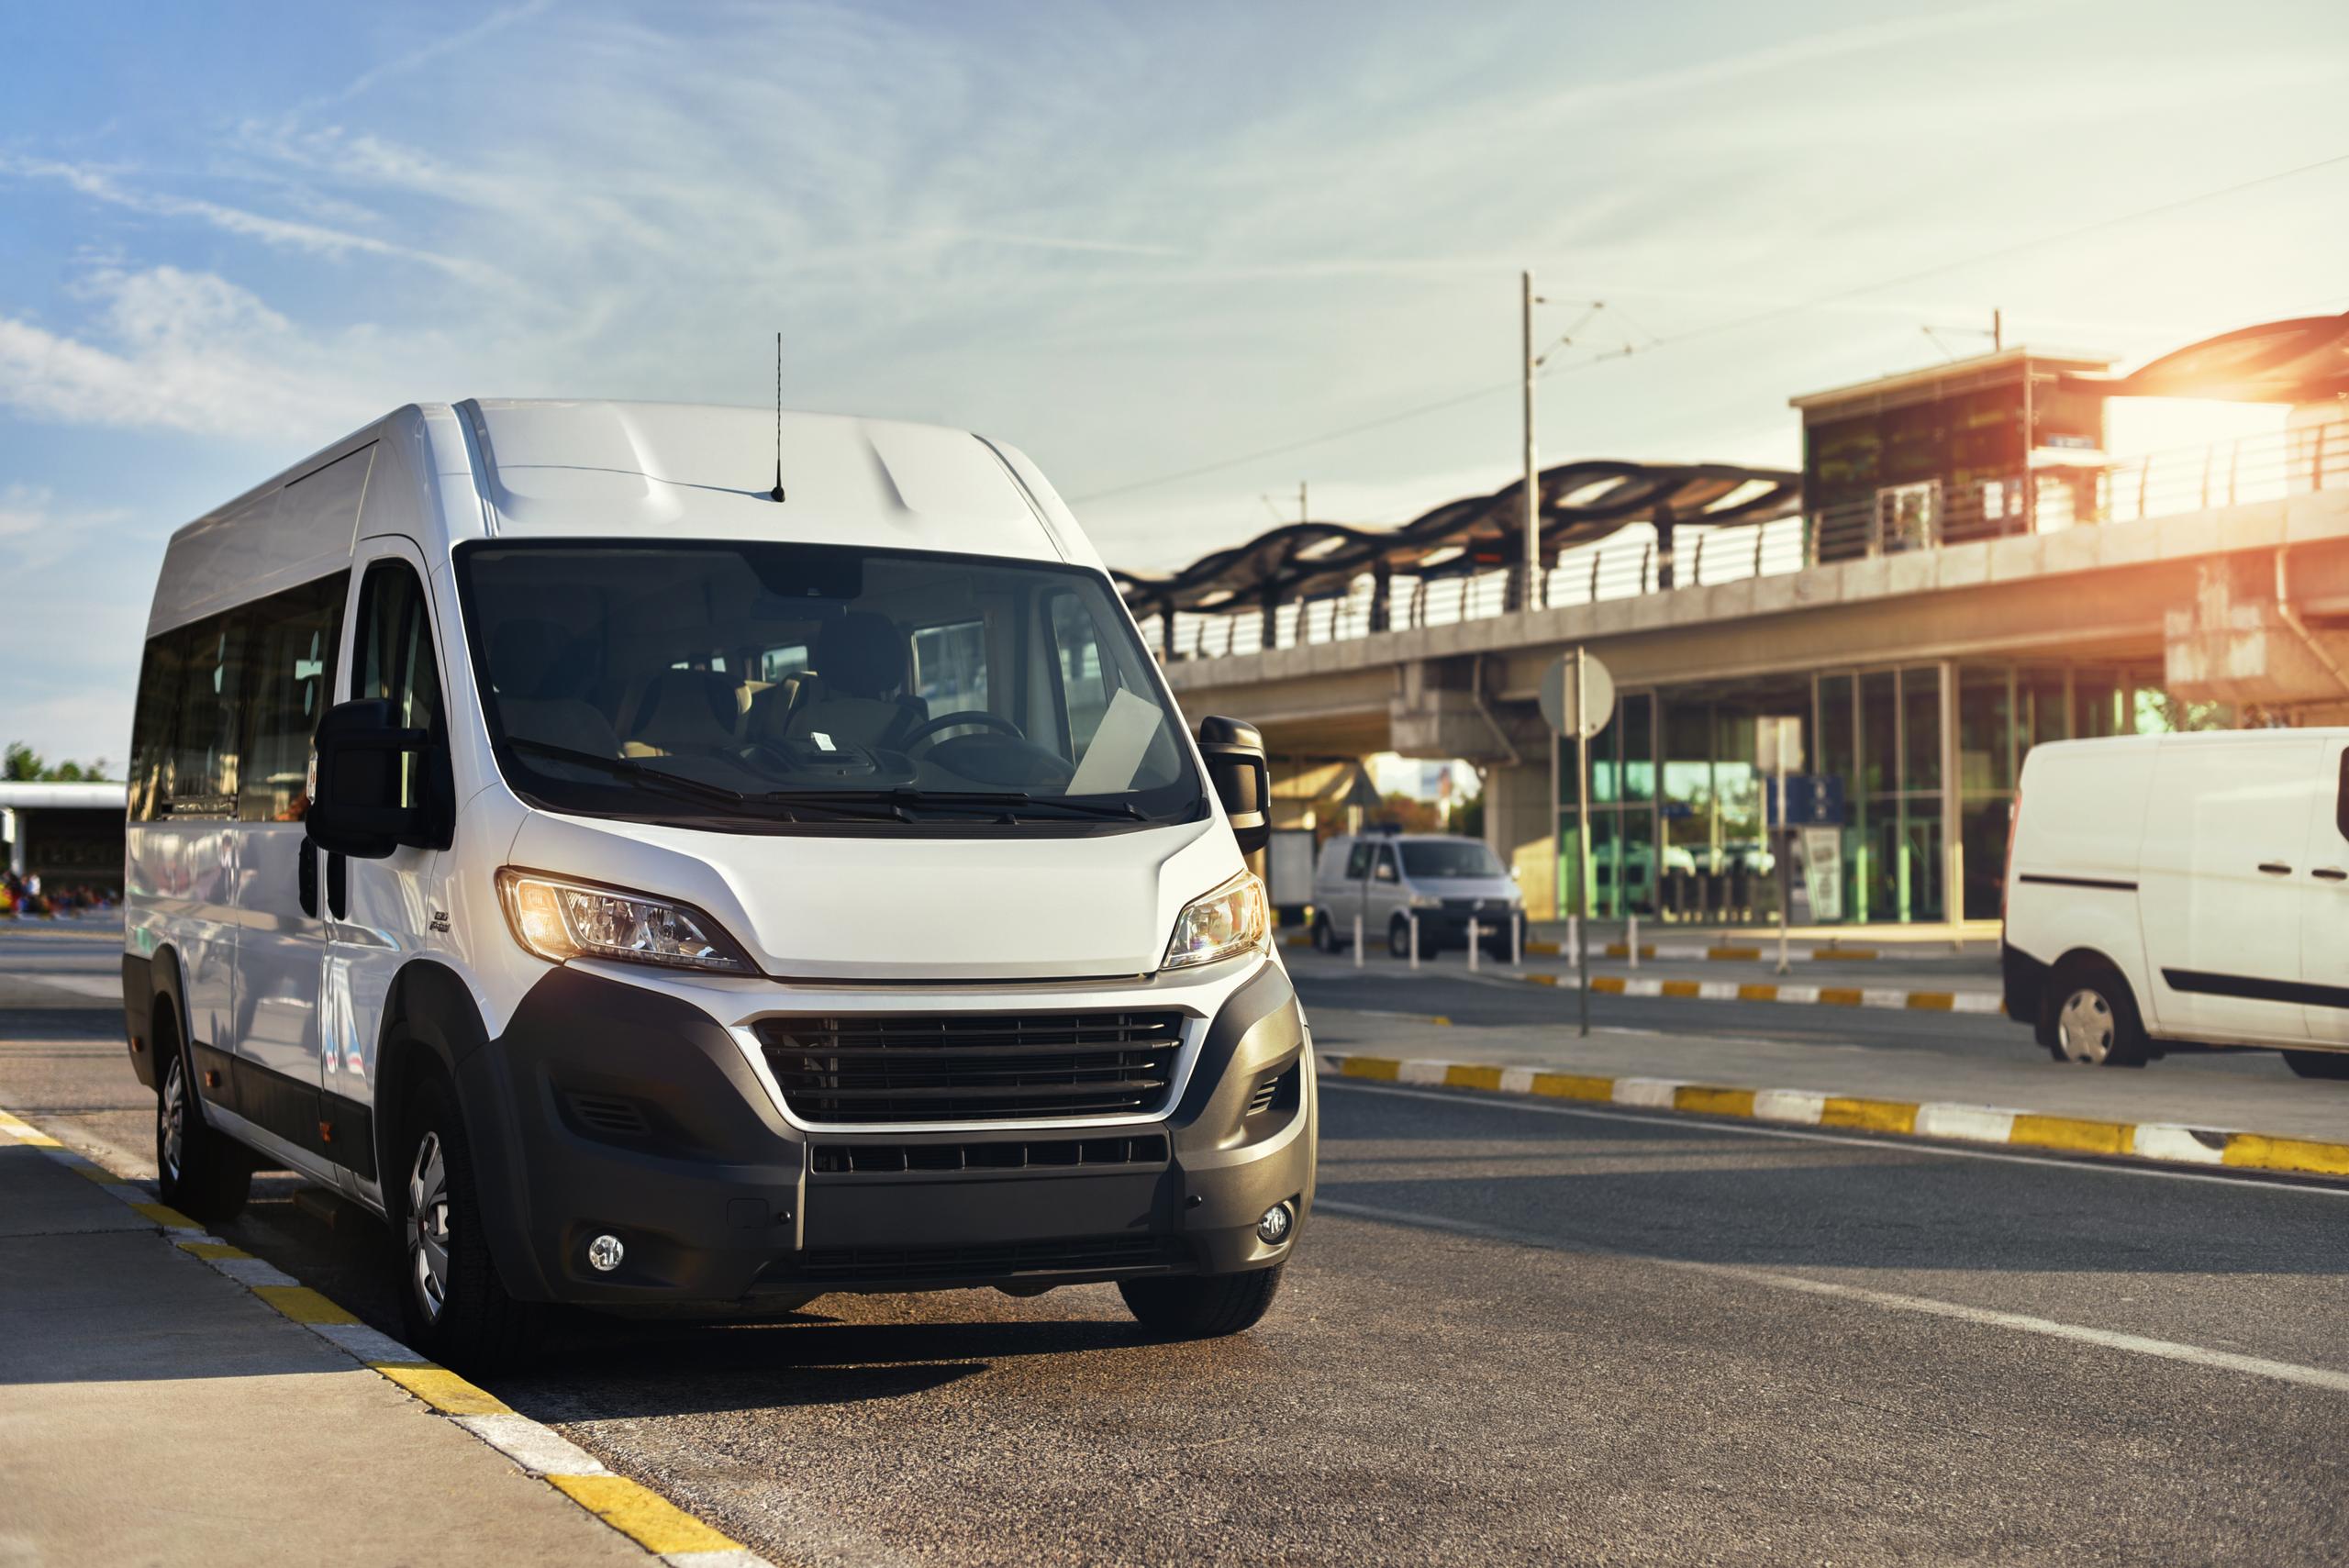 Business finance for a minibus | Minibus finance for limited company